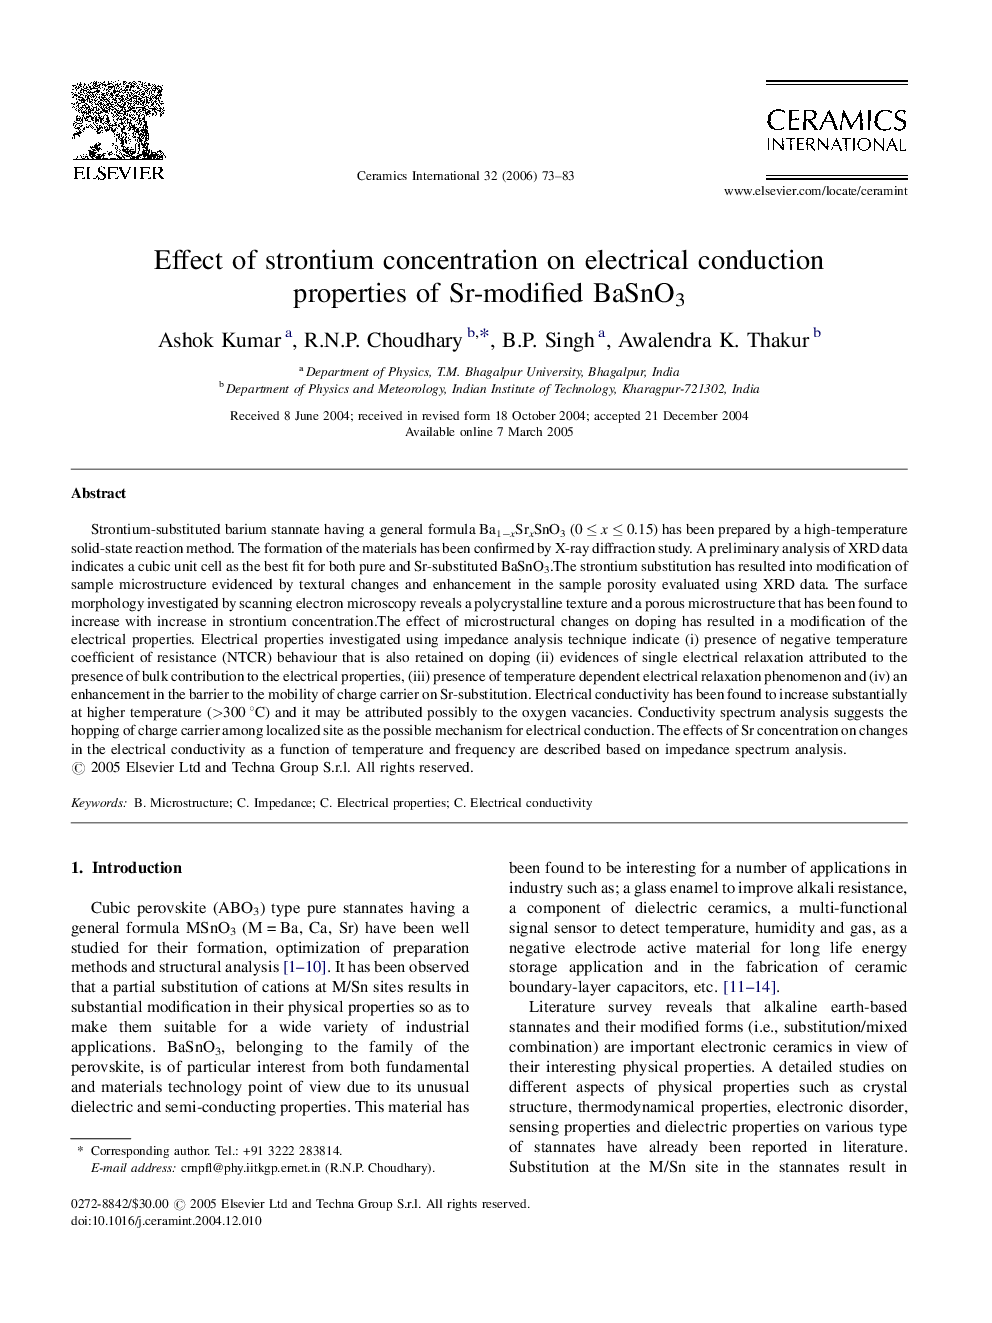 Effect of strontium concentration on electrical conduction properties of Sr-modified BaSnO3